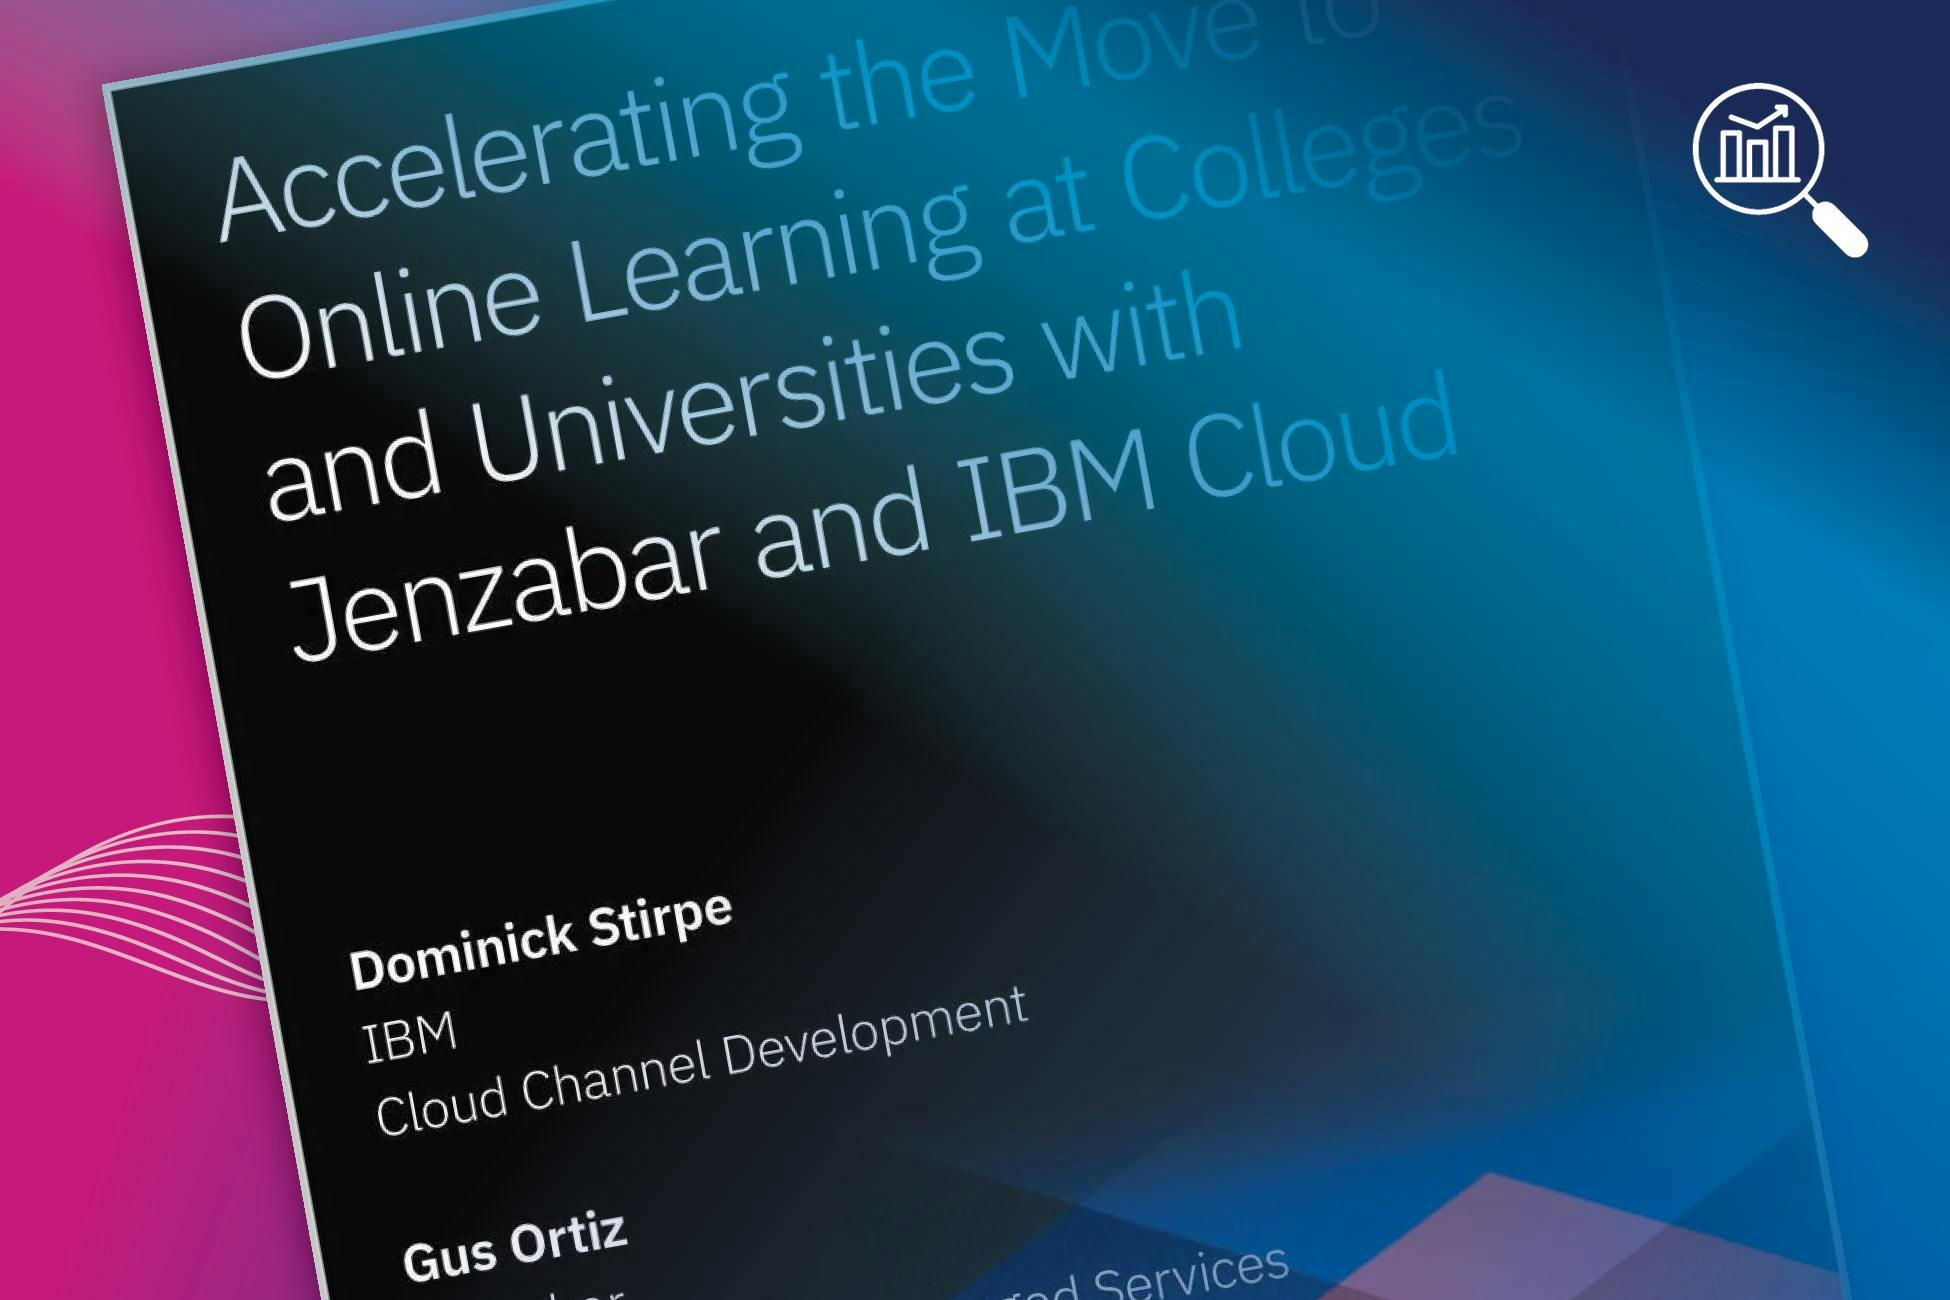 Industry Insight: Accelerating the Move to Online Learning at Colleges and Universities With Jenzabar and IBM Cloud